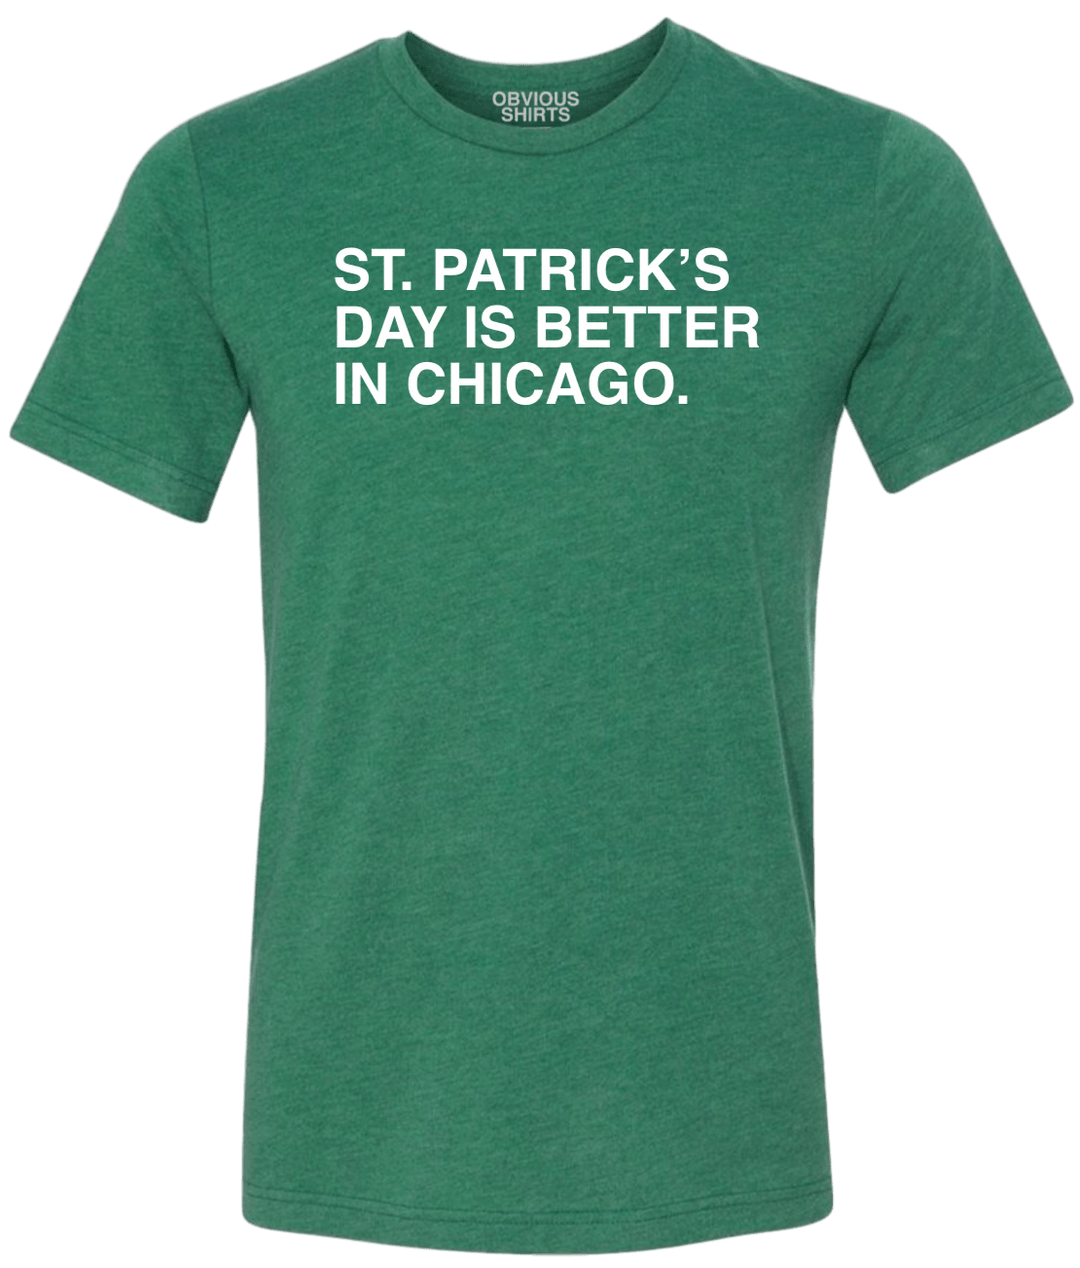 ST. PATRICK'S DAY IS BETTER IN CHICAGO. - OBVIOUS SHIRTS.